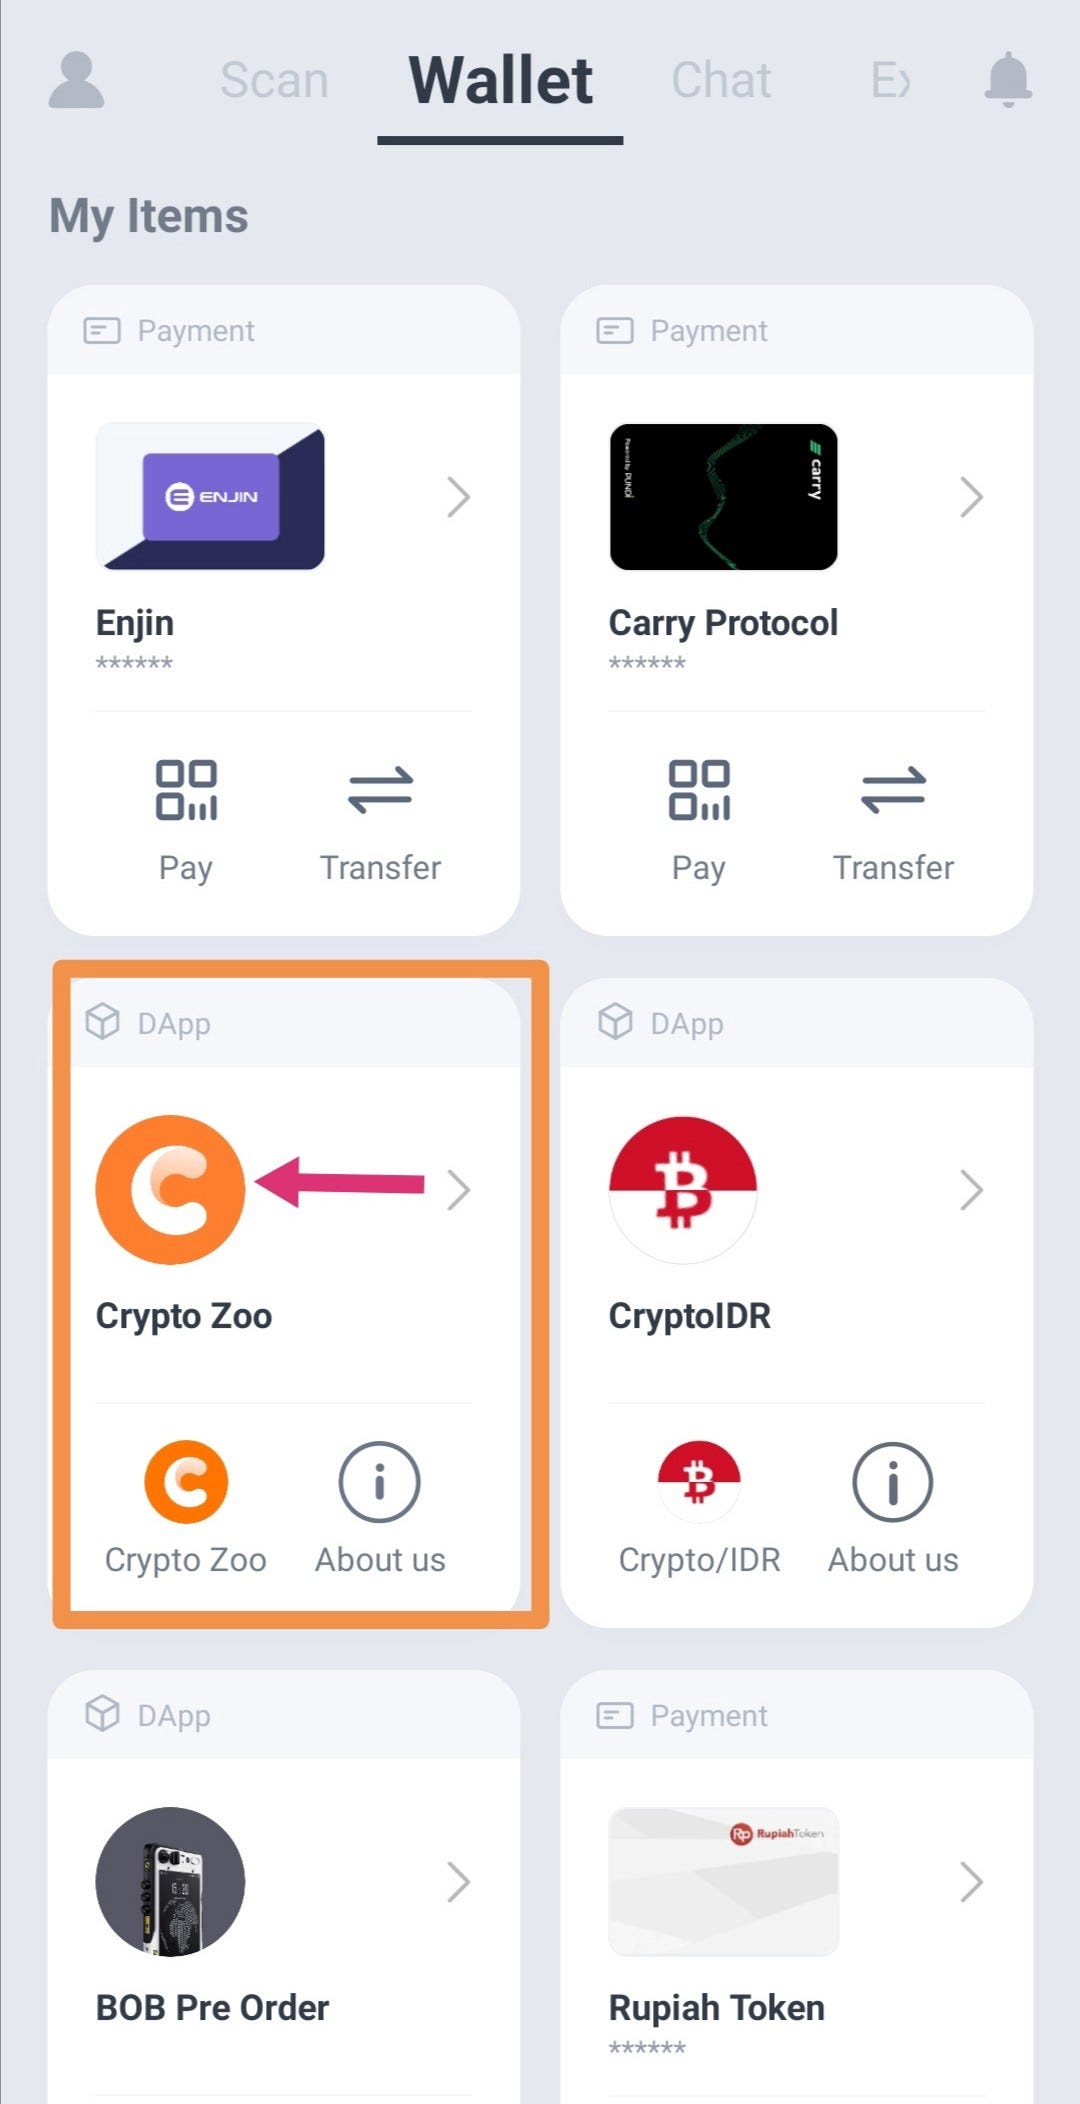 How to use Crypto Zoo DApp. Let’s start exploring the ...